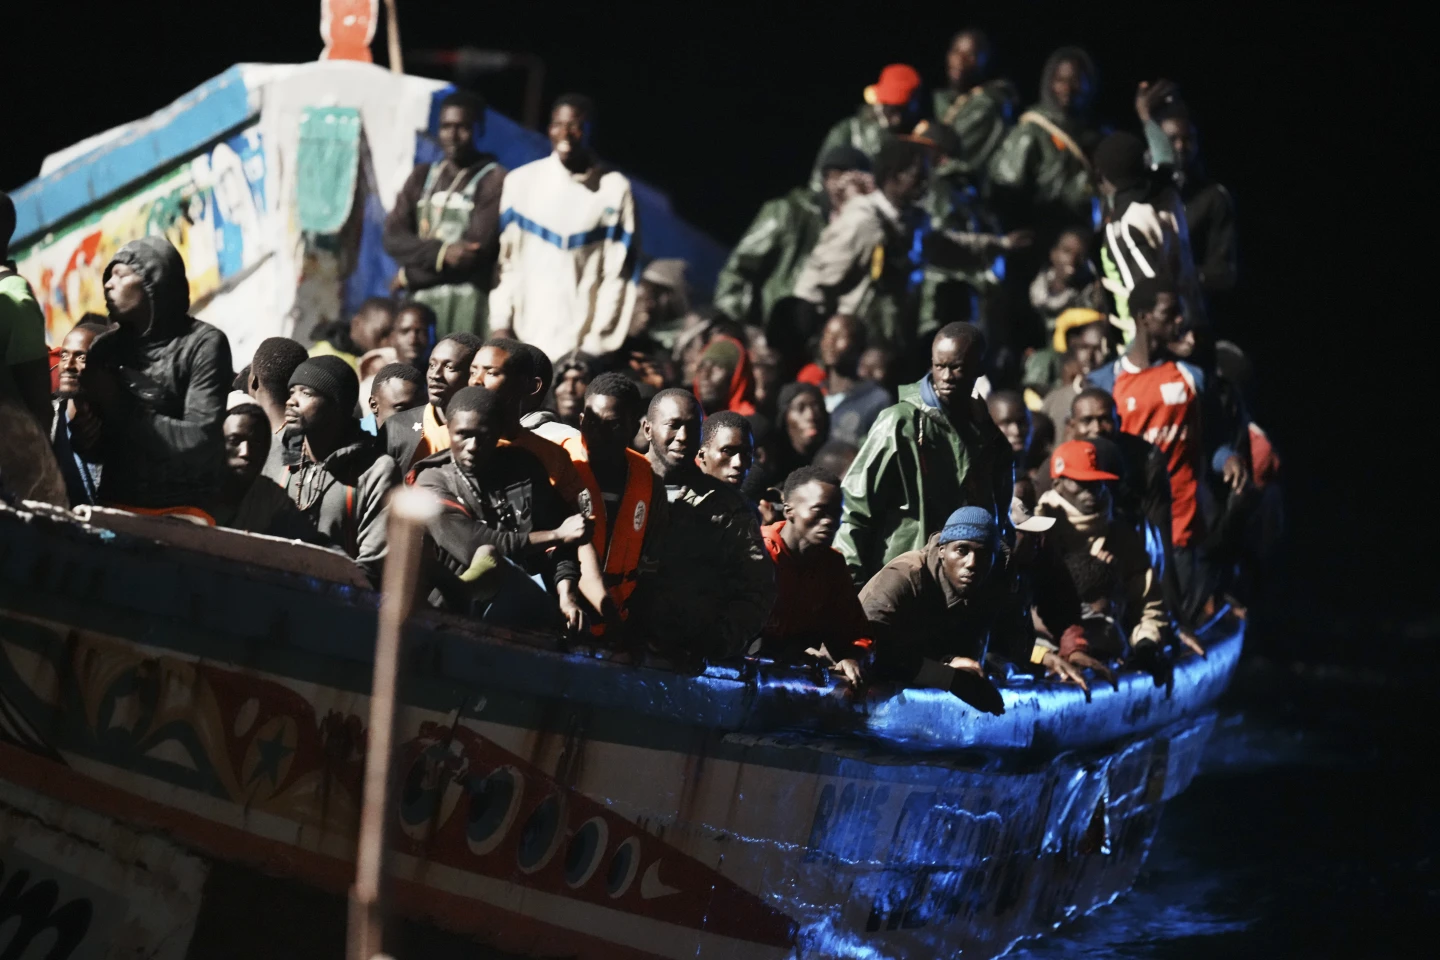 A record number of migrants have arrived in Spain’s Canary Islands this year. Most are from Senegal